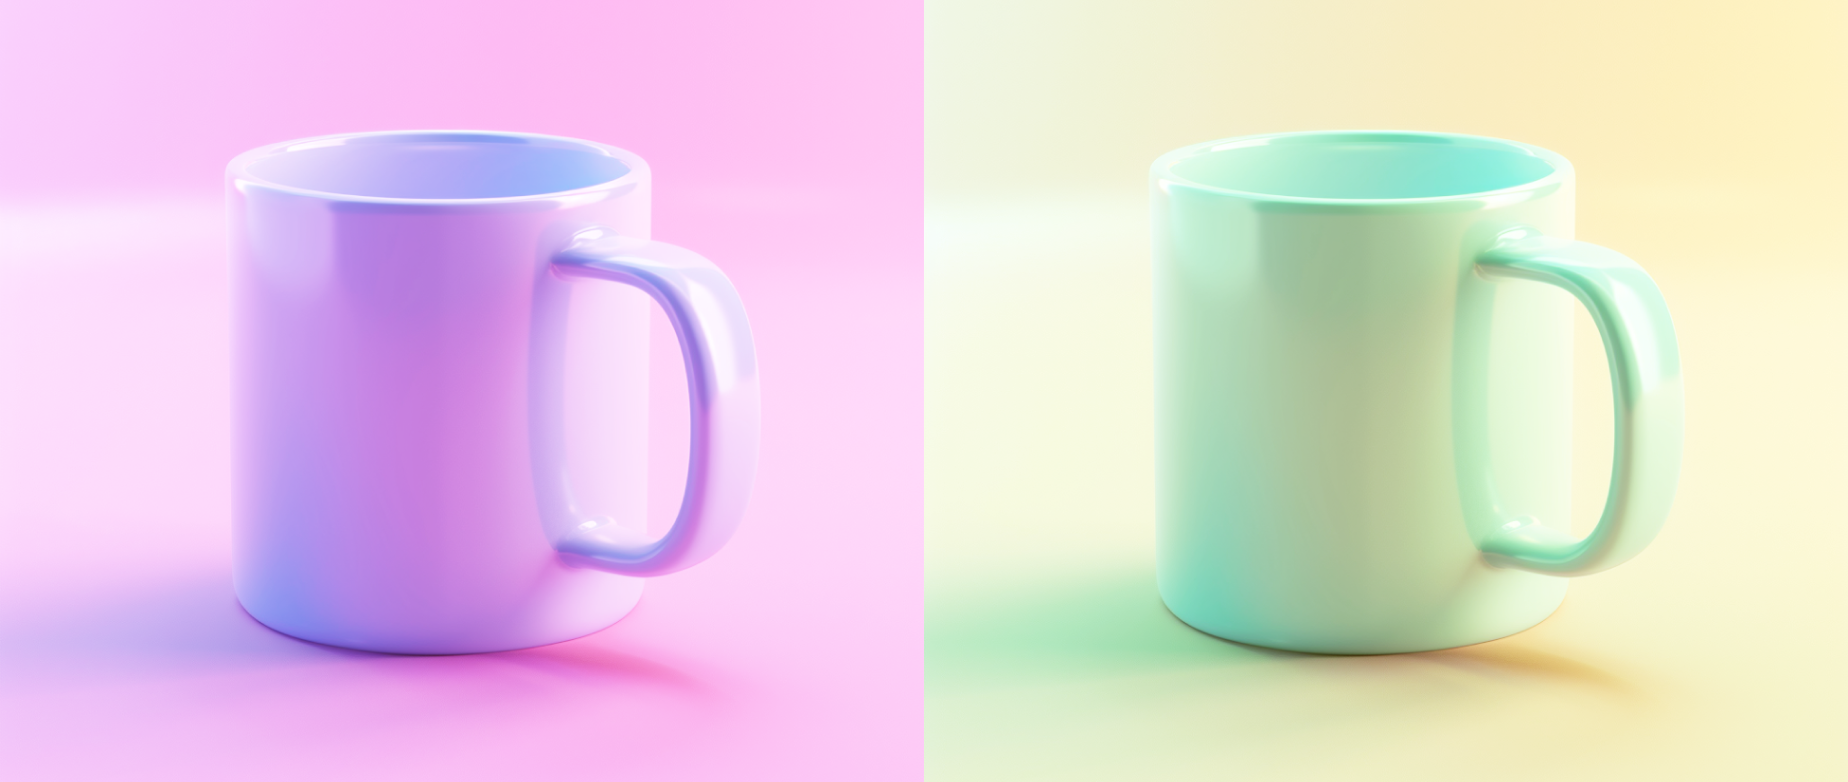 A pink mug next to a green mug on pink and green backgrounds.